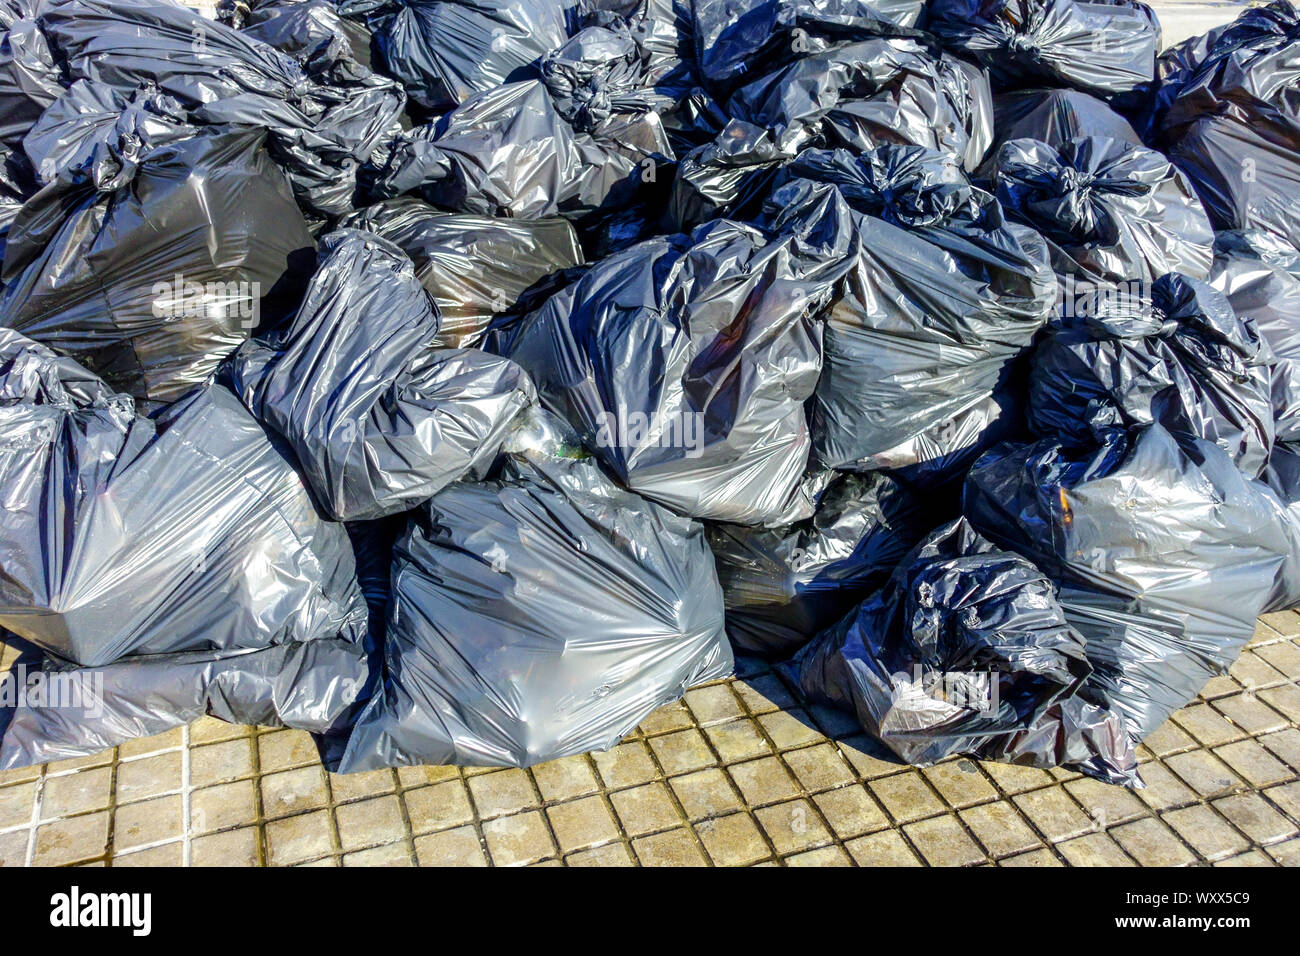 Pile of full plastic bags of garbage Stock Photo